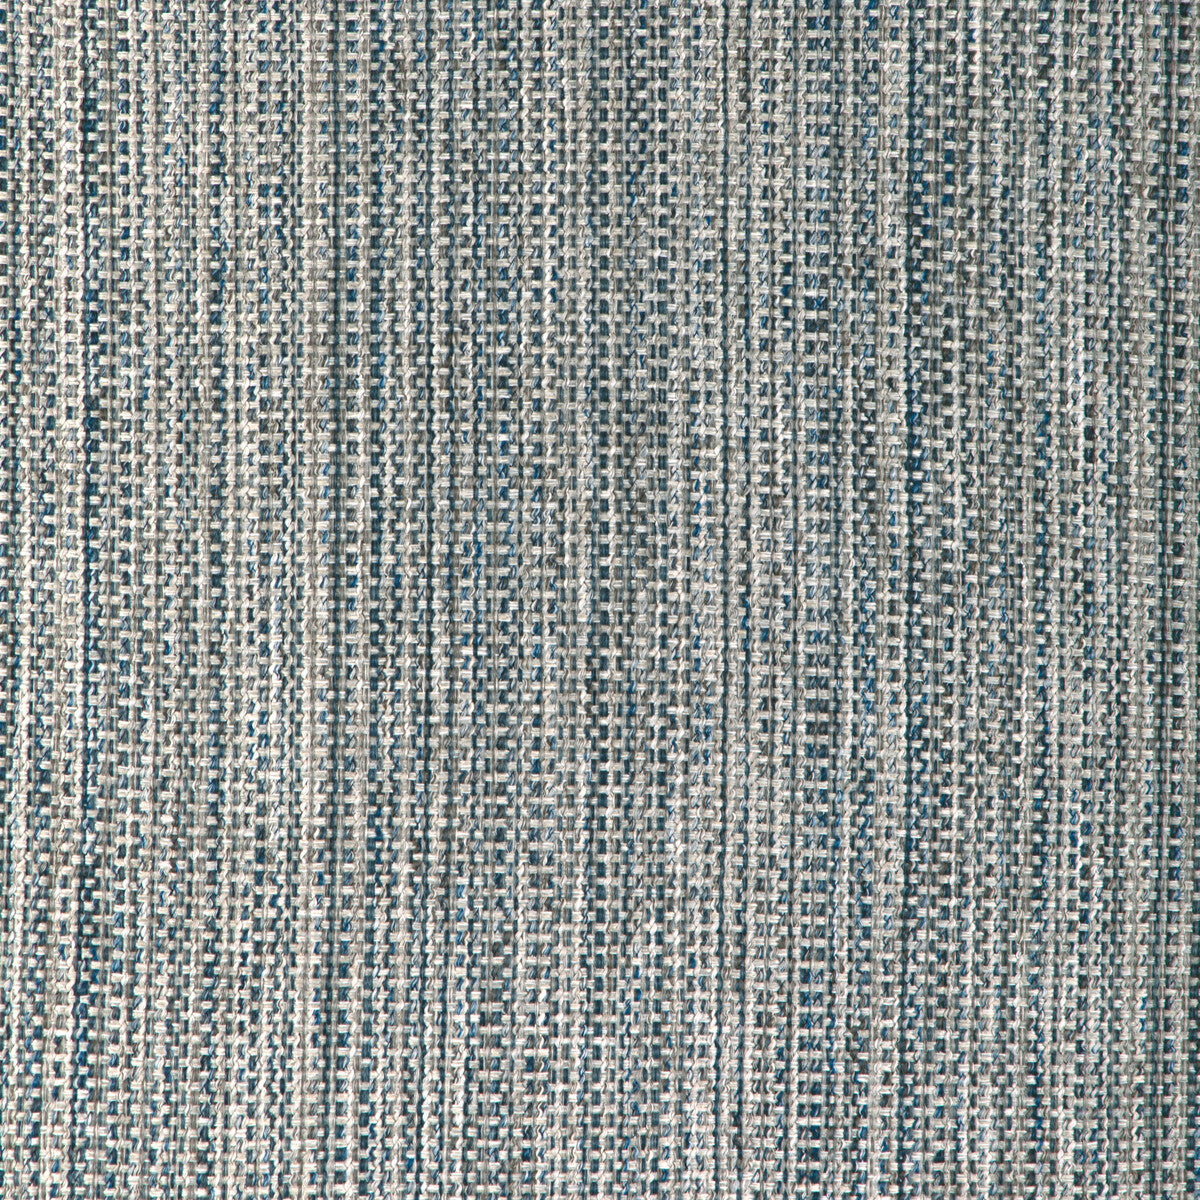 Kravet Smart fabric in 37018-511 color - pattern 37018.511.0 - by Kravet Smart in the Gis collection